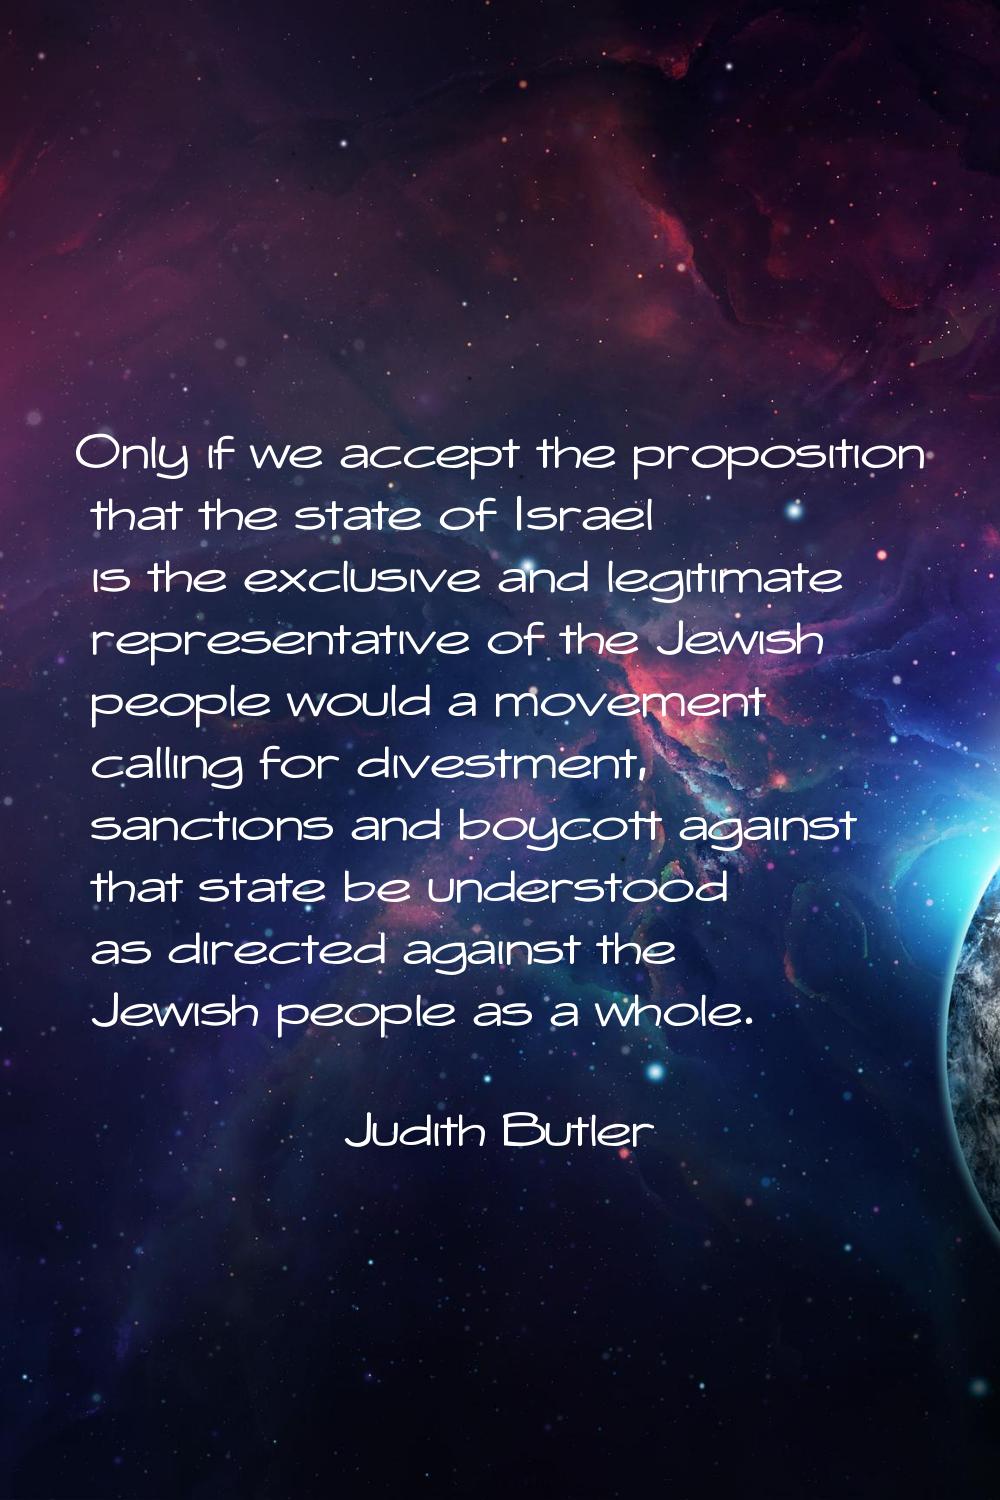 Only if we accept the proposition that the state of Israel is the exclusive and legitimate represen